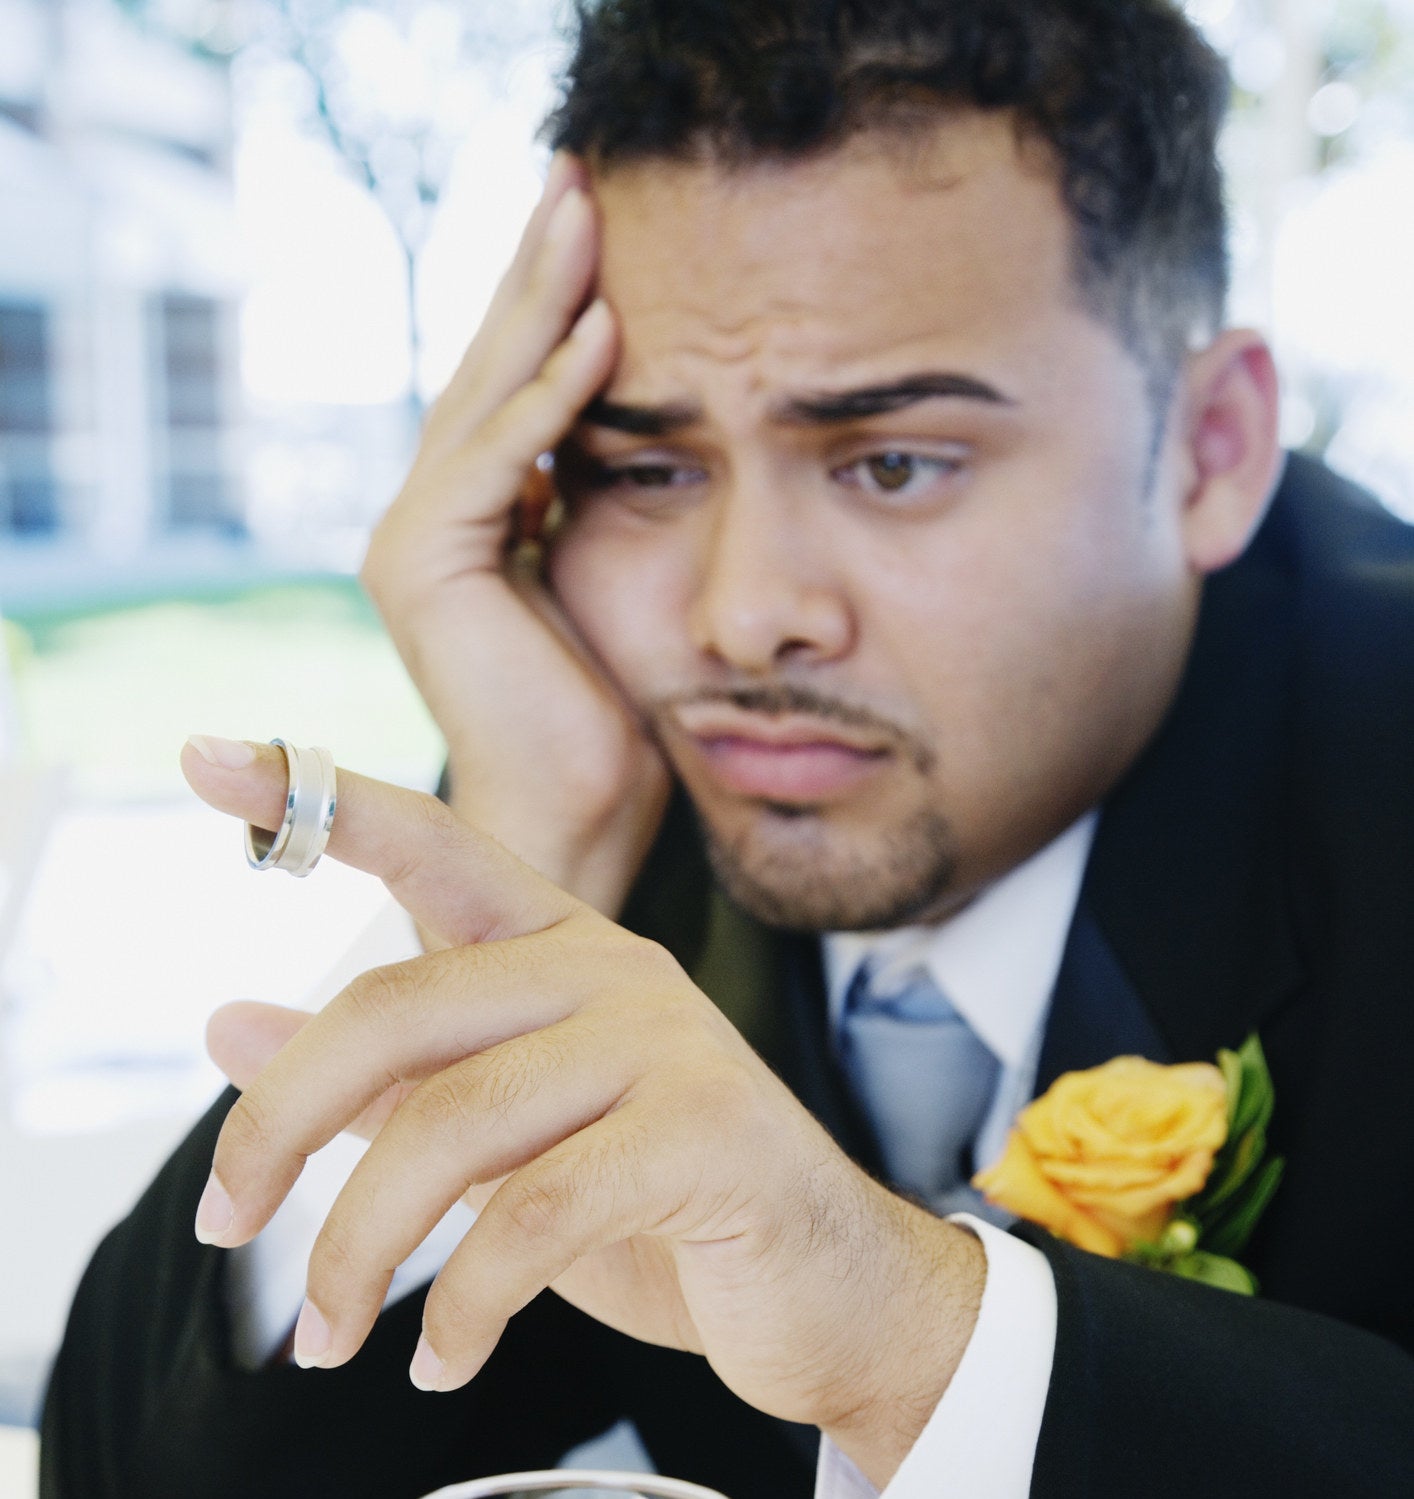 Upset-looking man wearing a suit and corsage sits with his hand holding his face